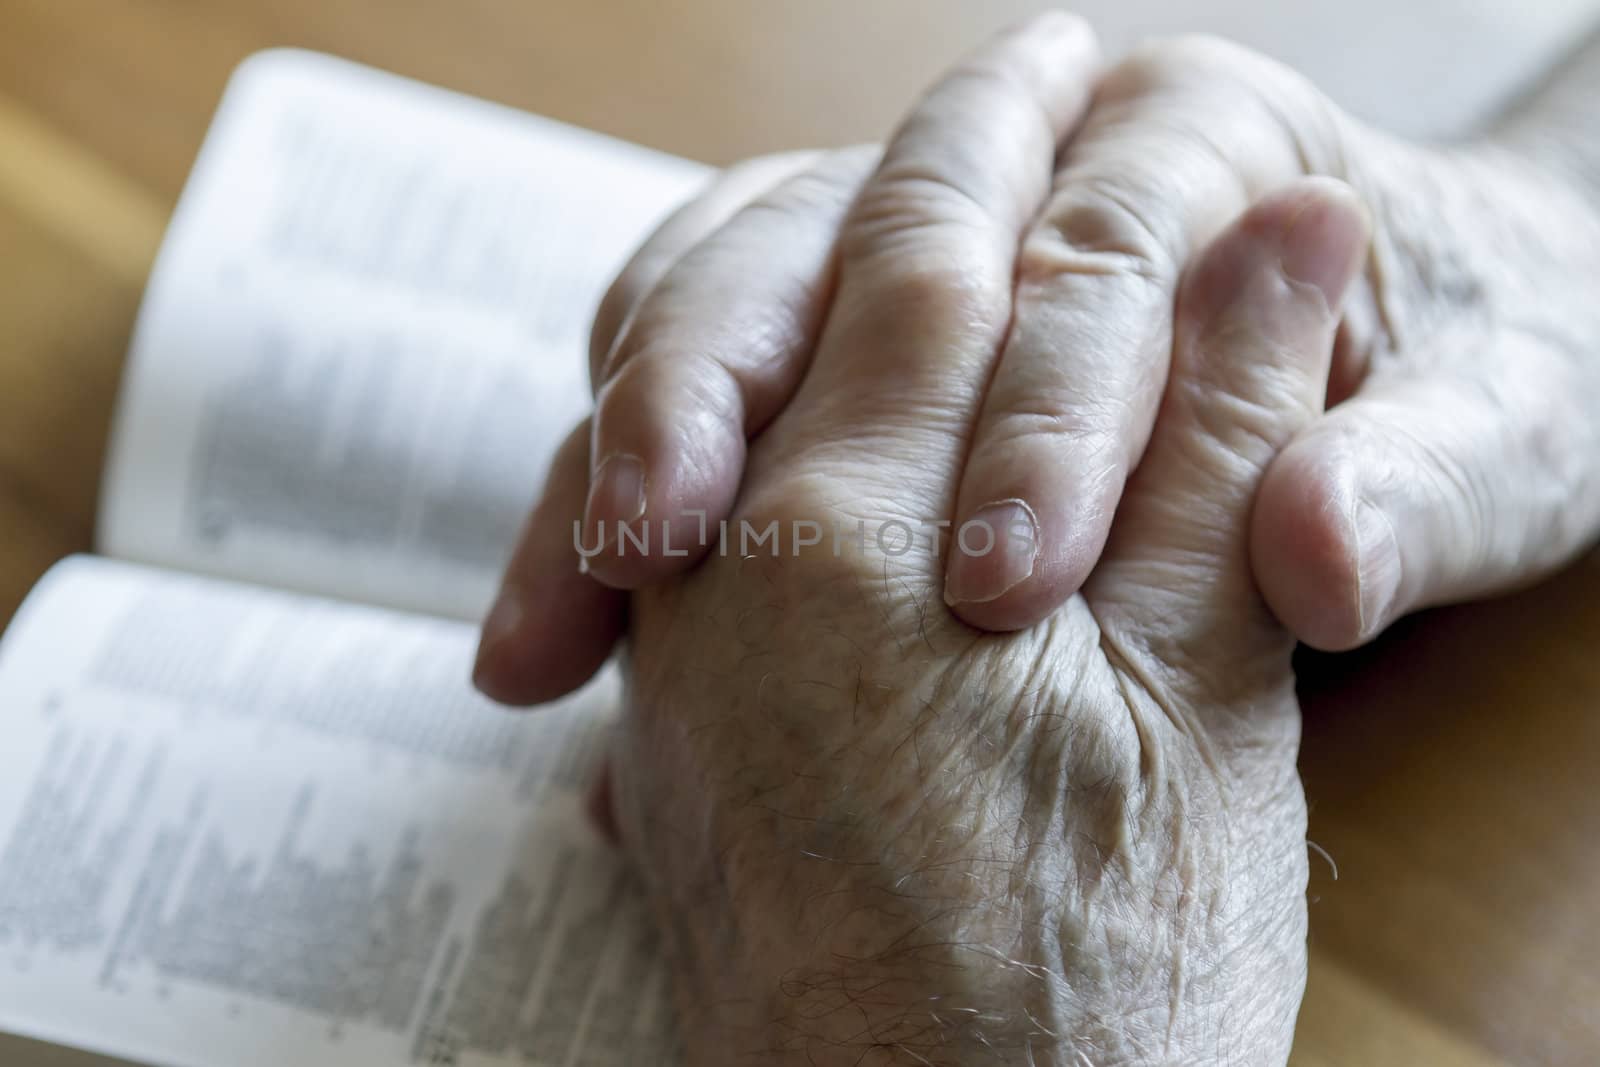 weathered old man's hands clasped in prayer over open Bible